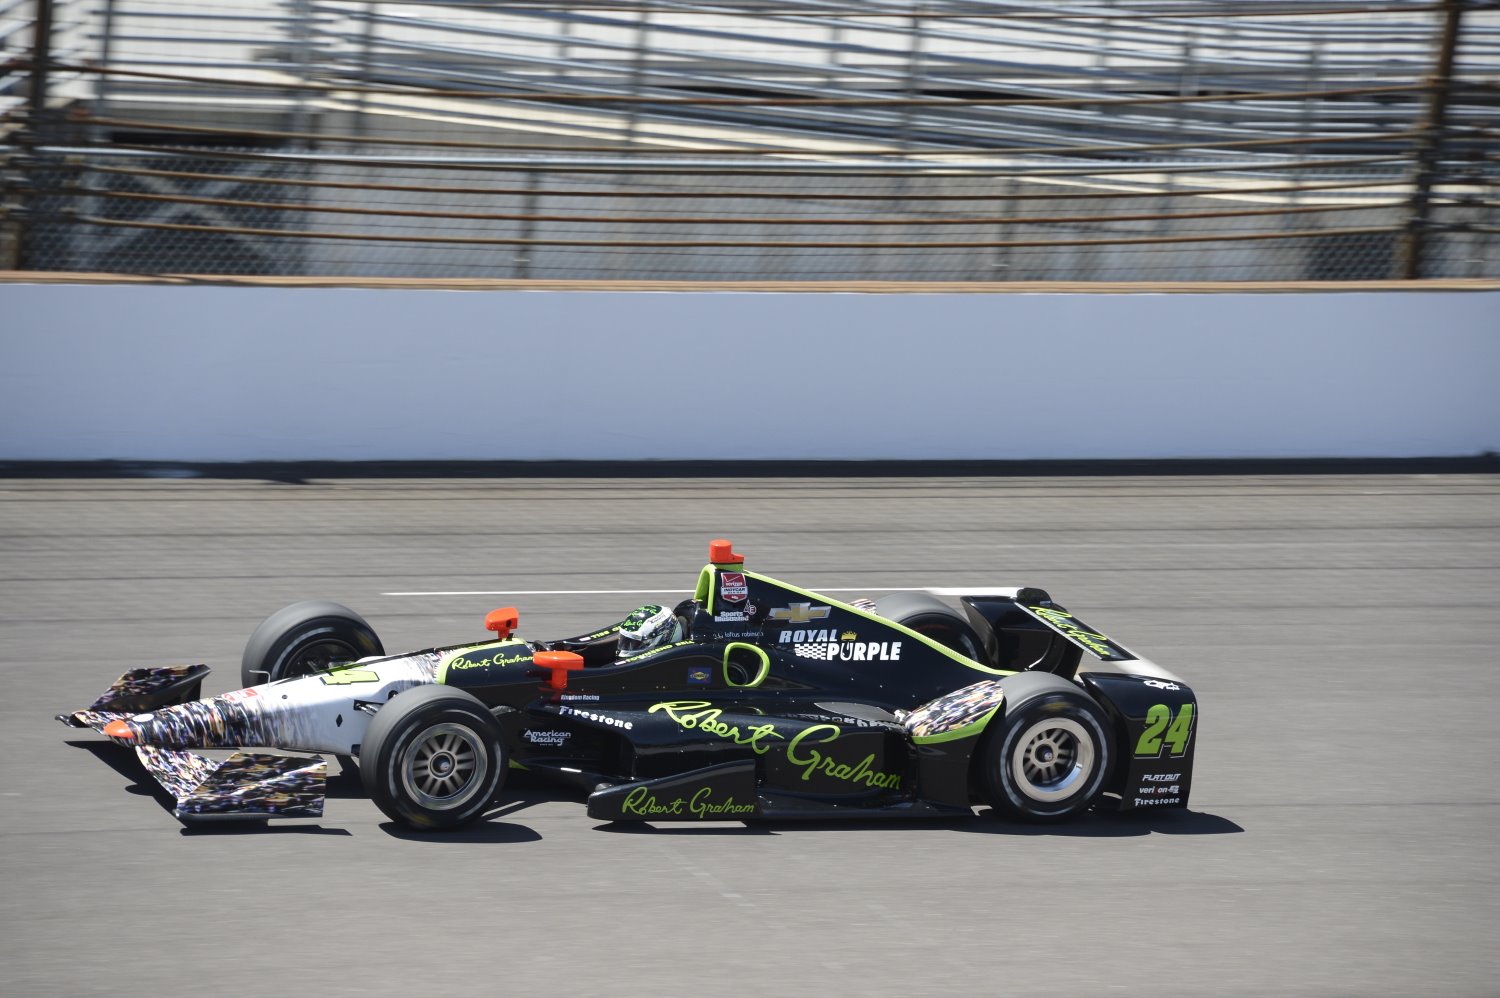 Townsend Bell in last year's Indy 500